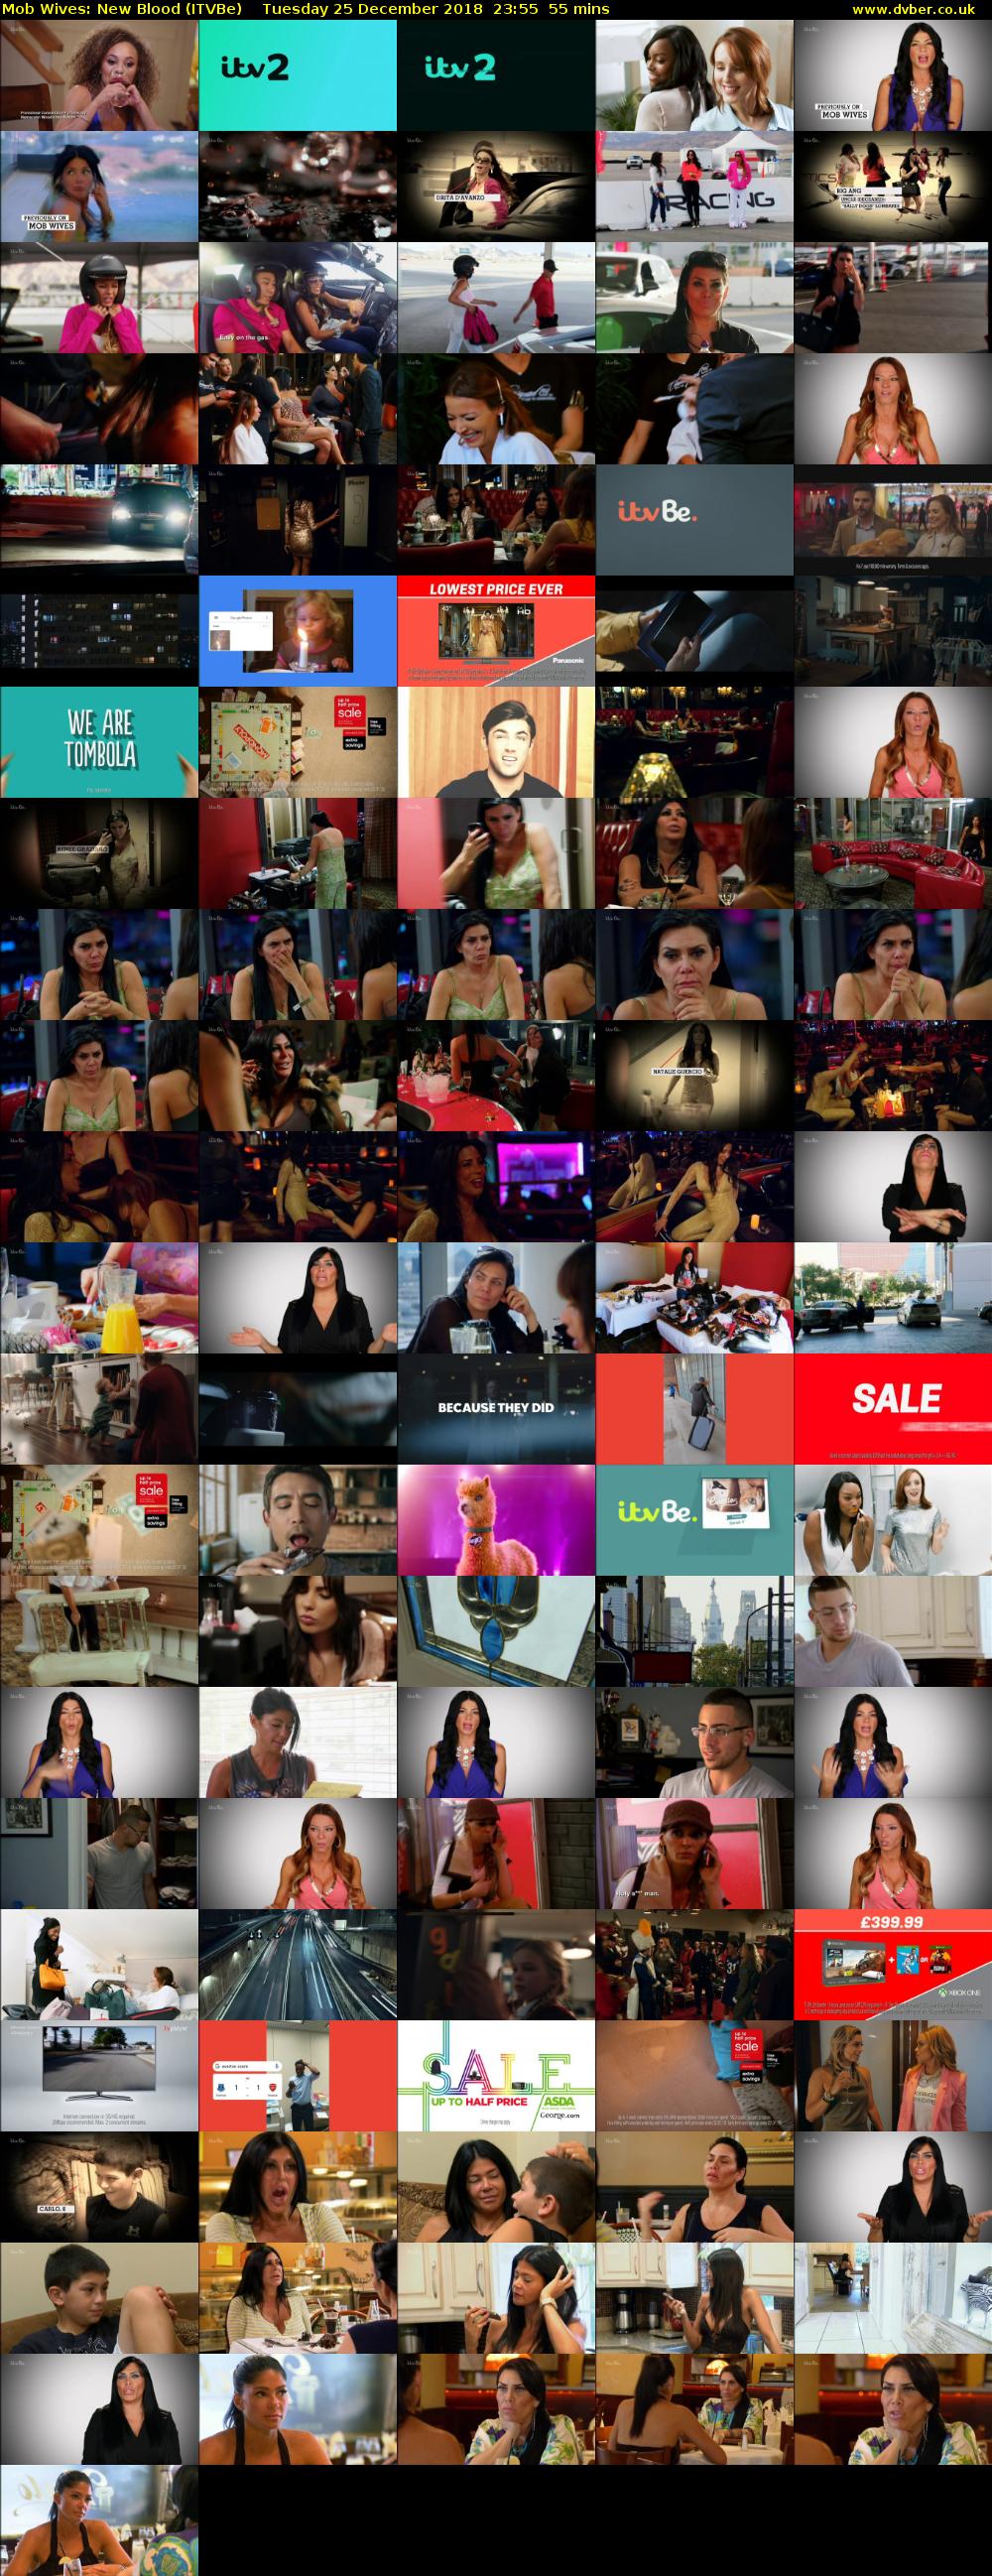 Mob Wives: New Blood (ITVBe) Tuesday 25 December 2018 23:55 - 00:50